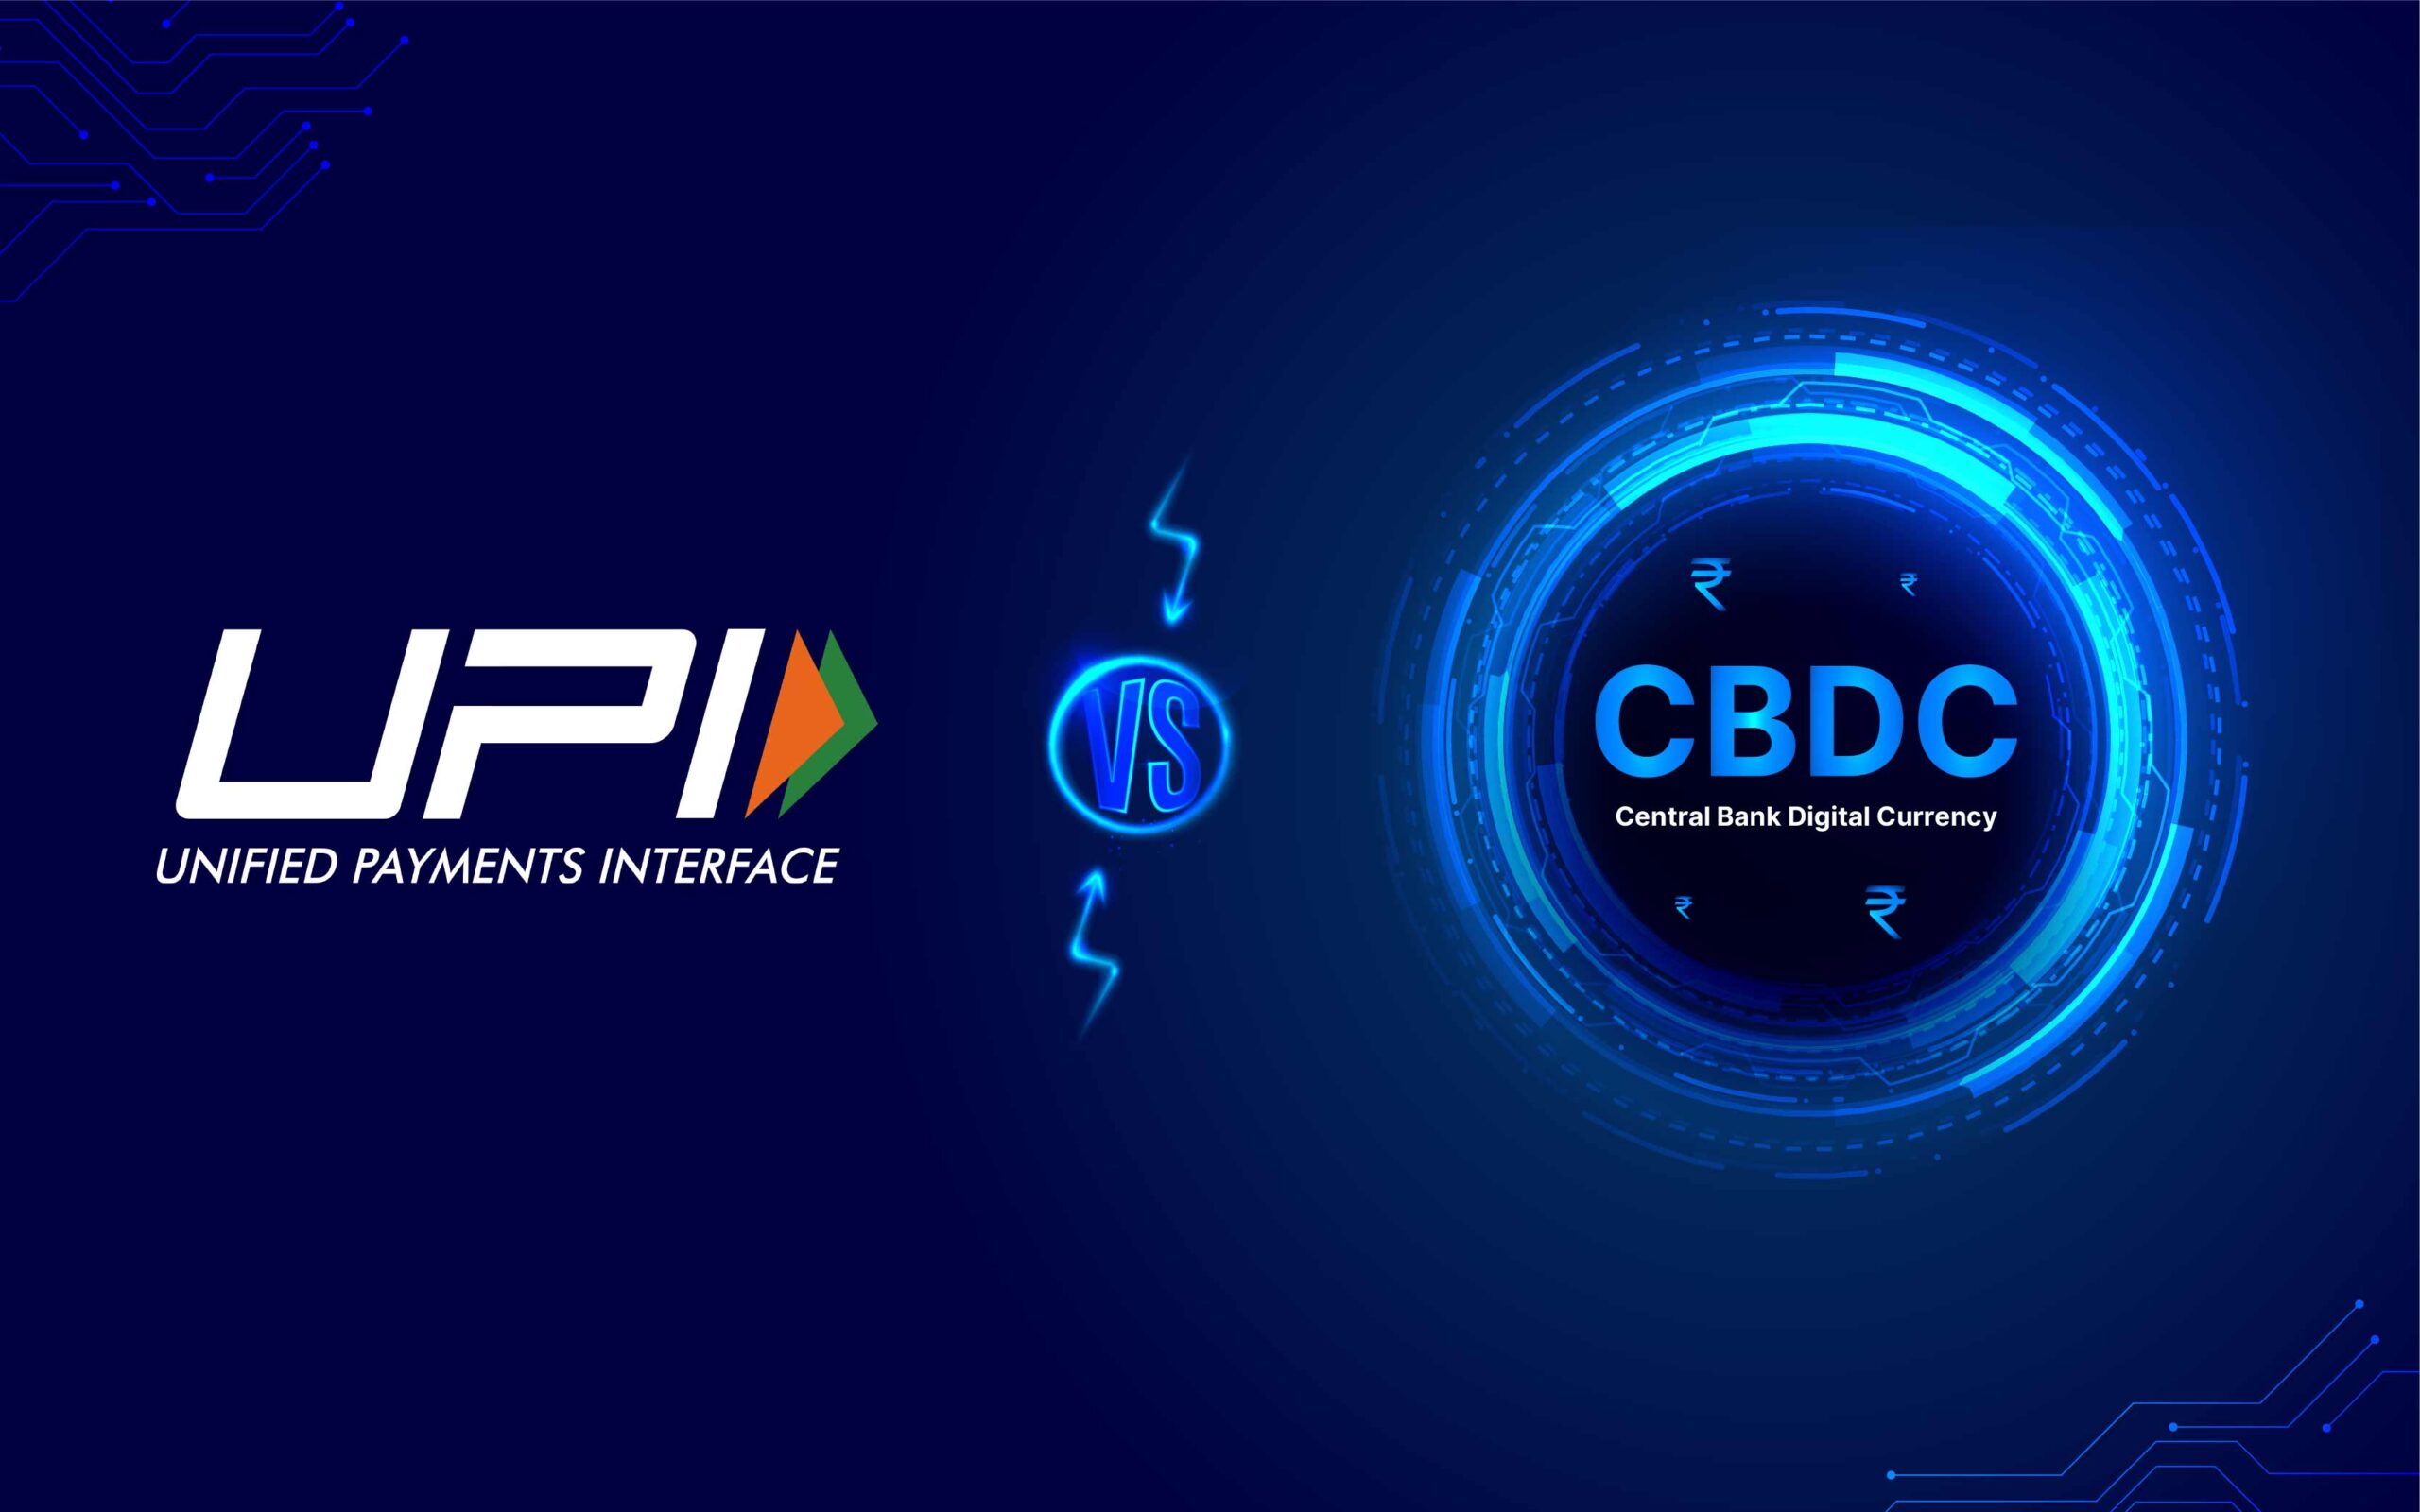 Difference Between Central Bank Digital Currency (CBDC) & UPI